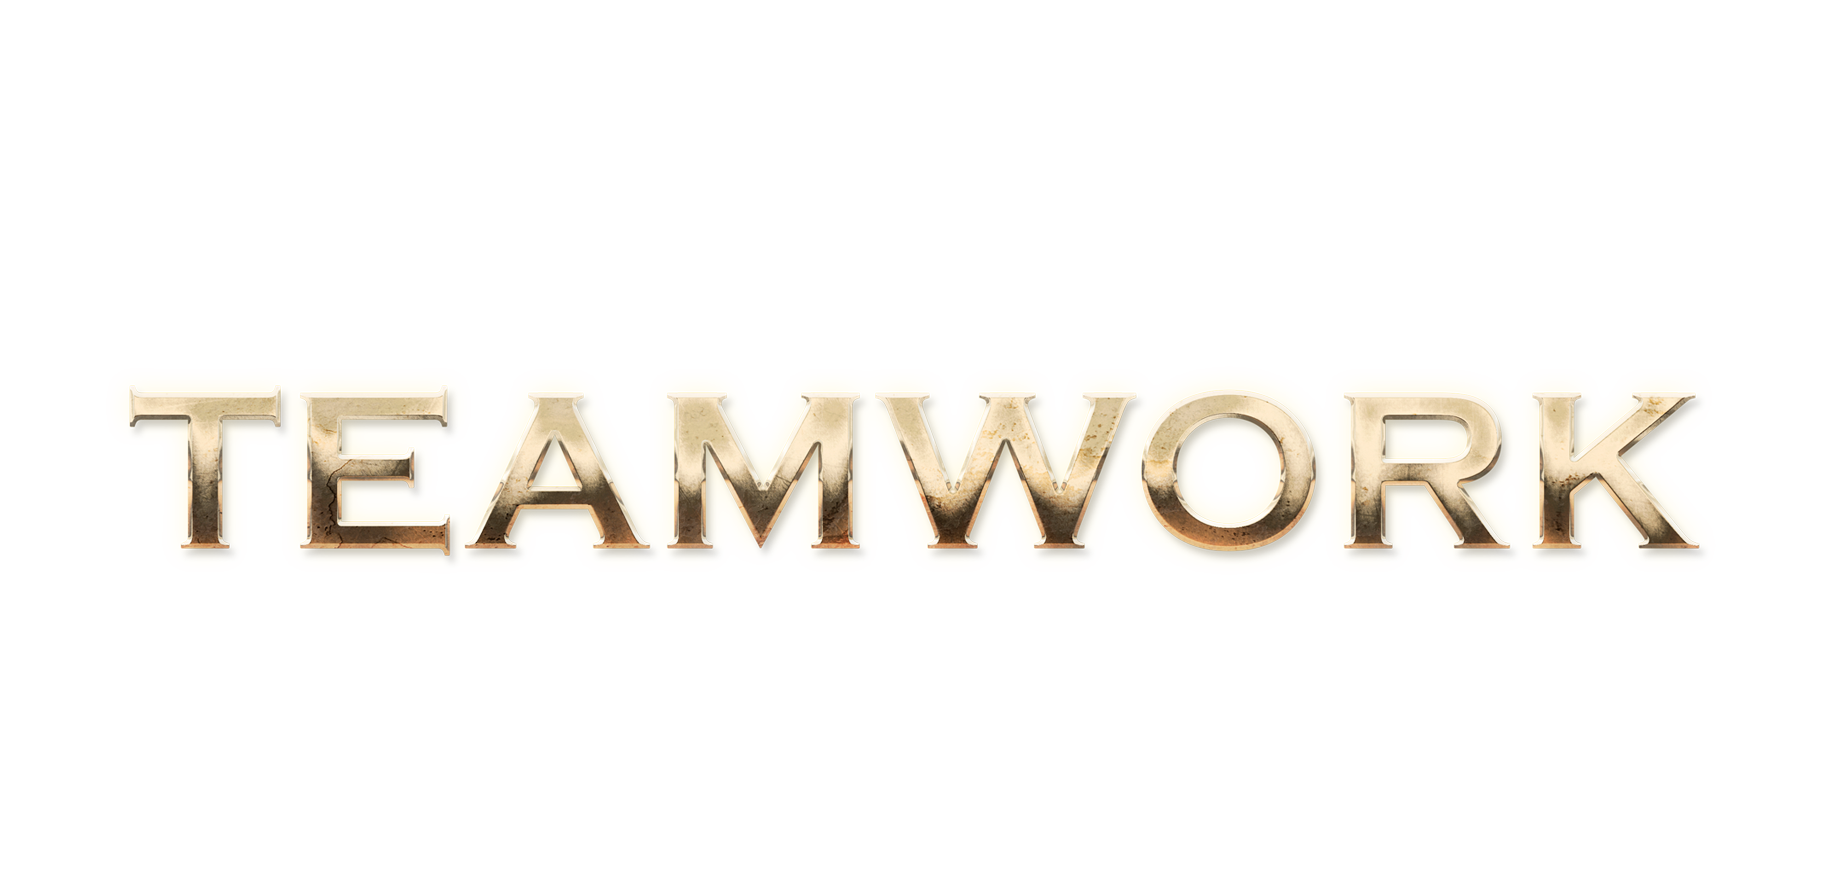 WORD TEAMWORK gold text effects art typography PNG images free